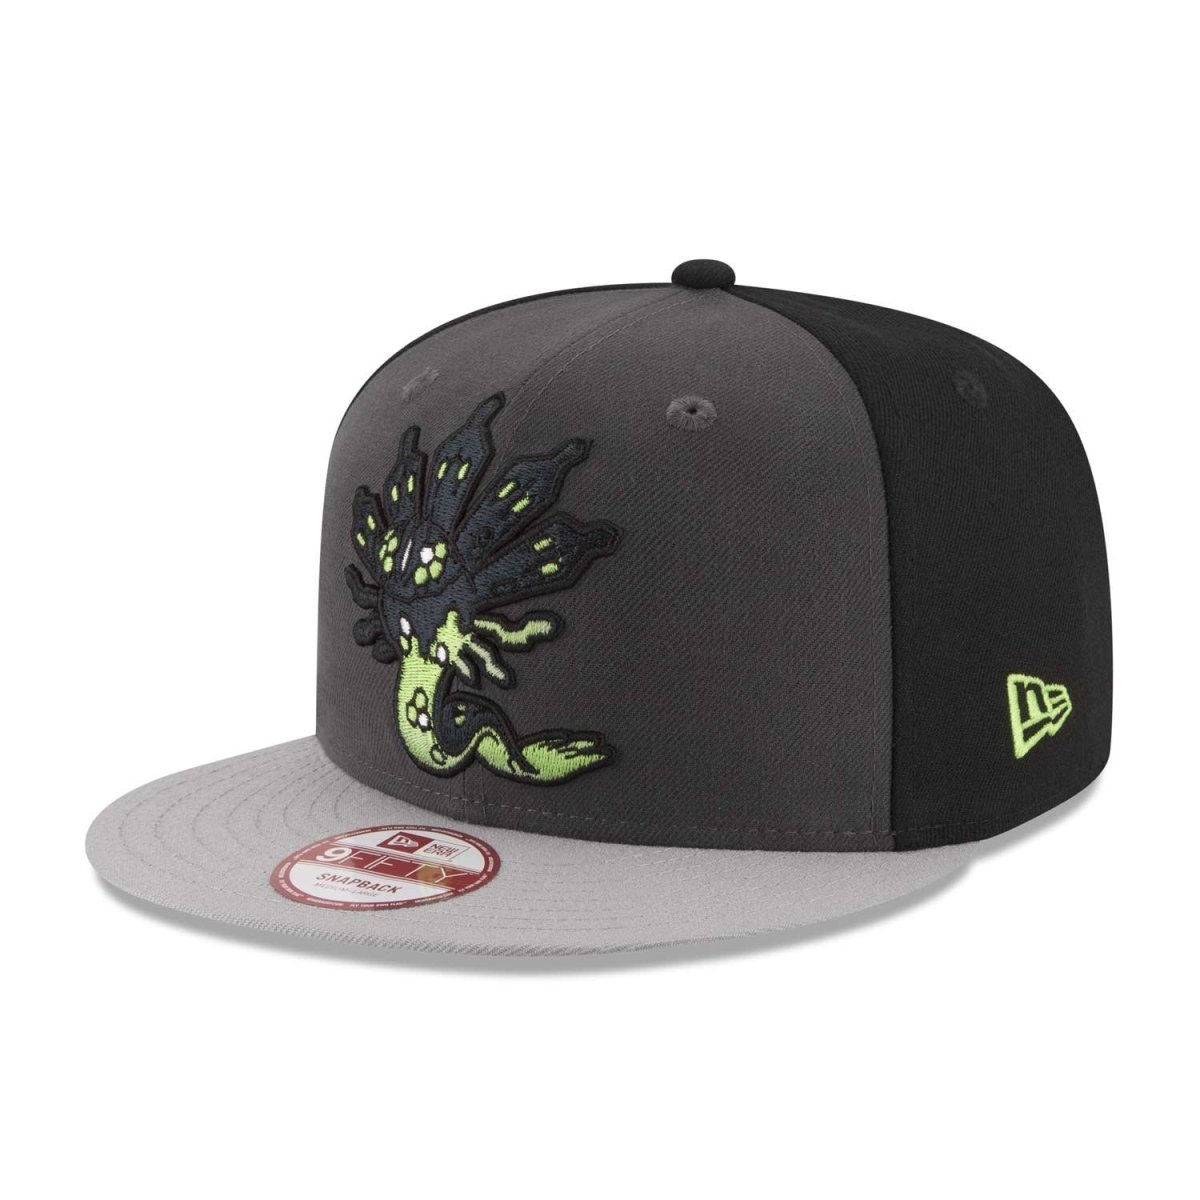 Zygarde 50% Forme 9FIFTY Pokémon Center Baseball Official New Era Site by Size-Adult) (One | Cap